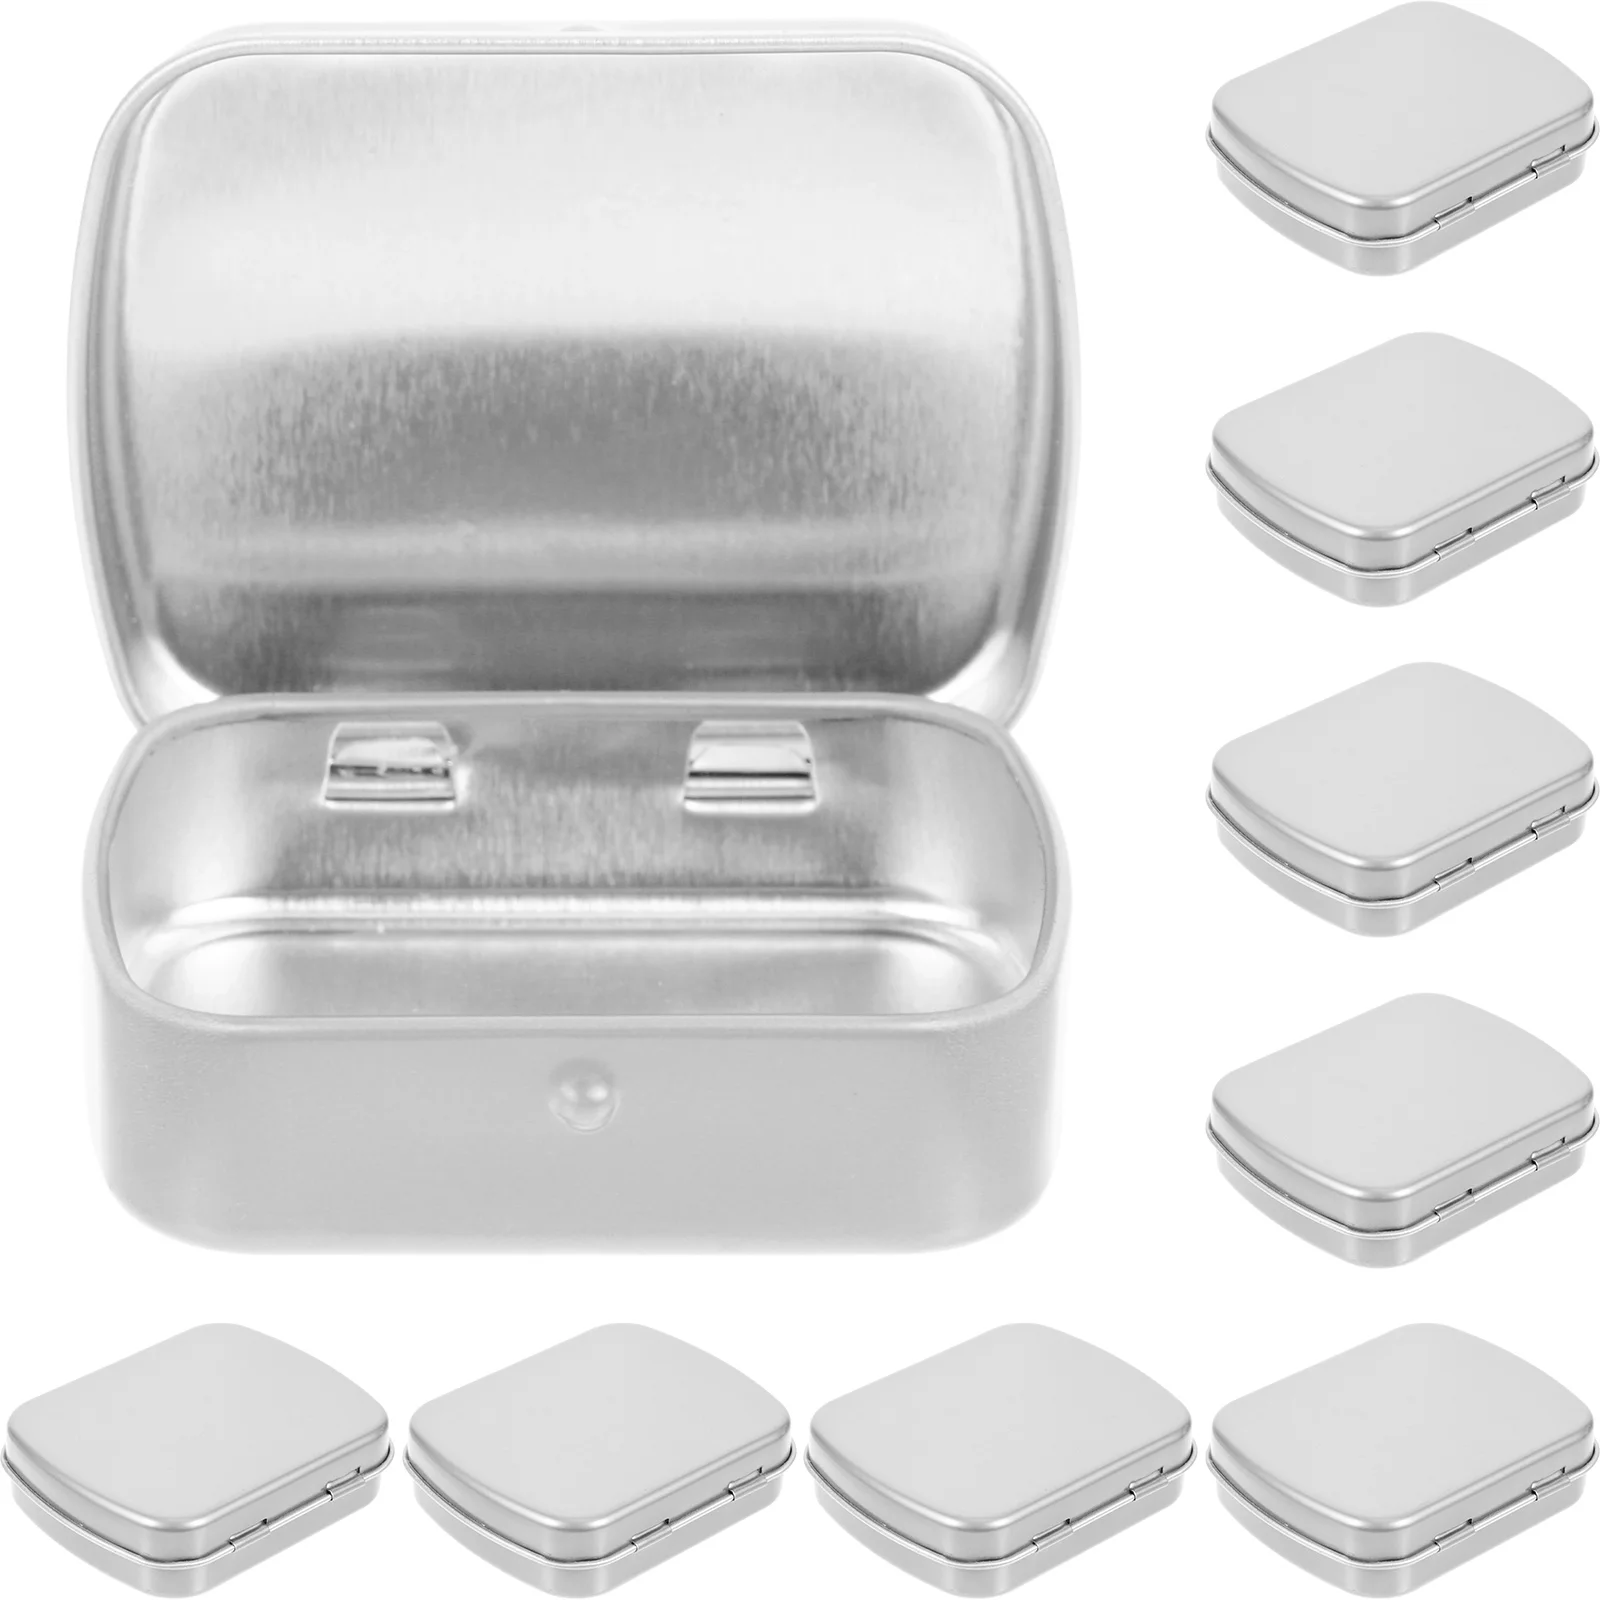 

10 Pcs Tin Box Iron Rectangular Case Sample Mini Hinges Storage Containers Lids Can Travel Small Toolbox